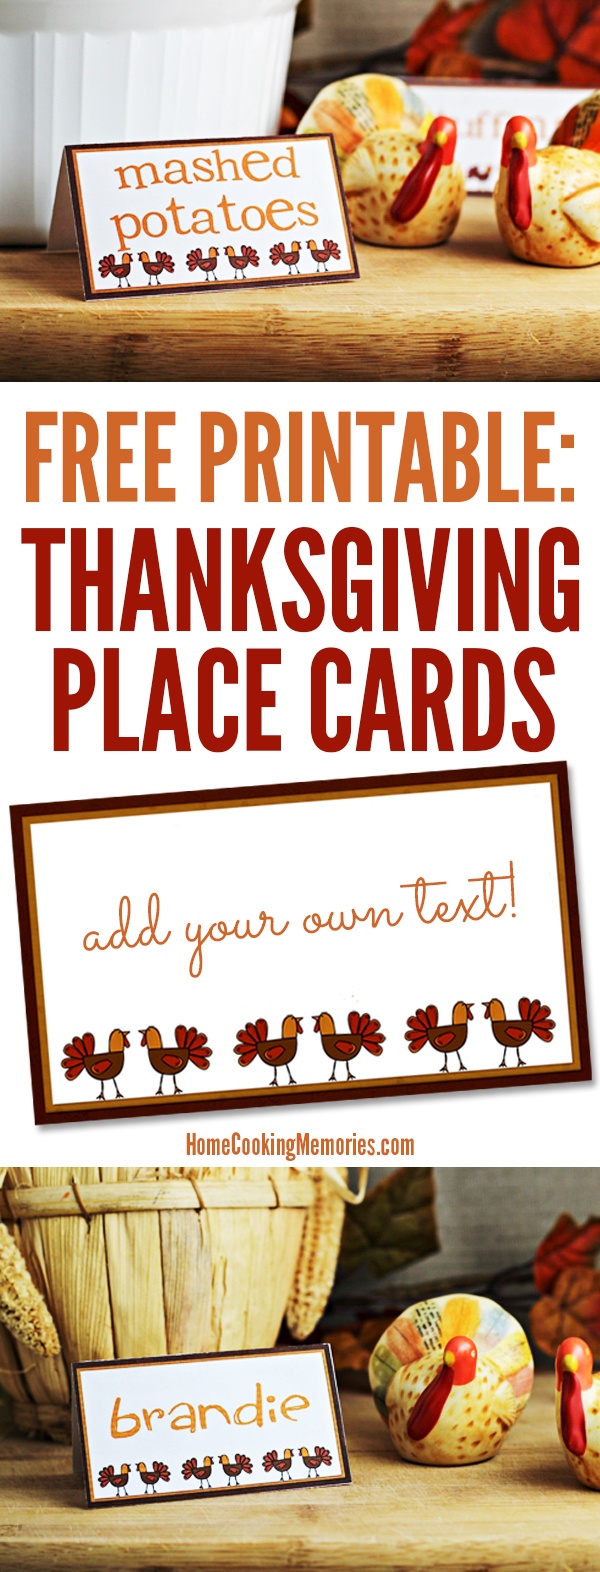 Free Printables: Thanksgiving Place Cards - Home Cooking Memories - Free Thanksgiving Printables Place Cards